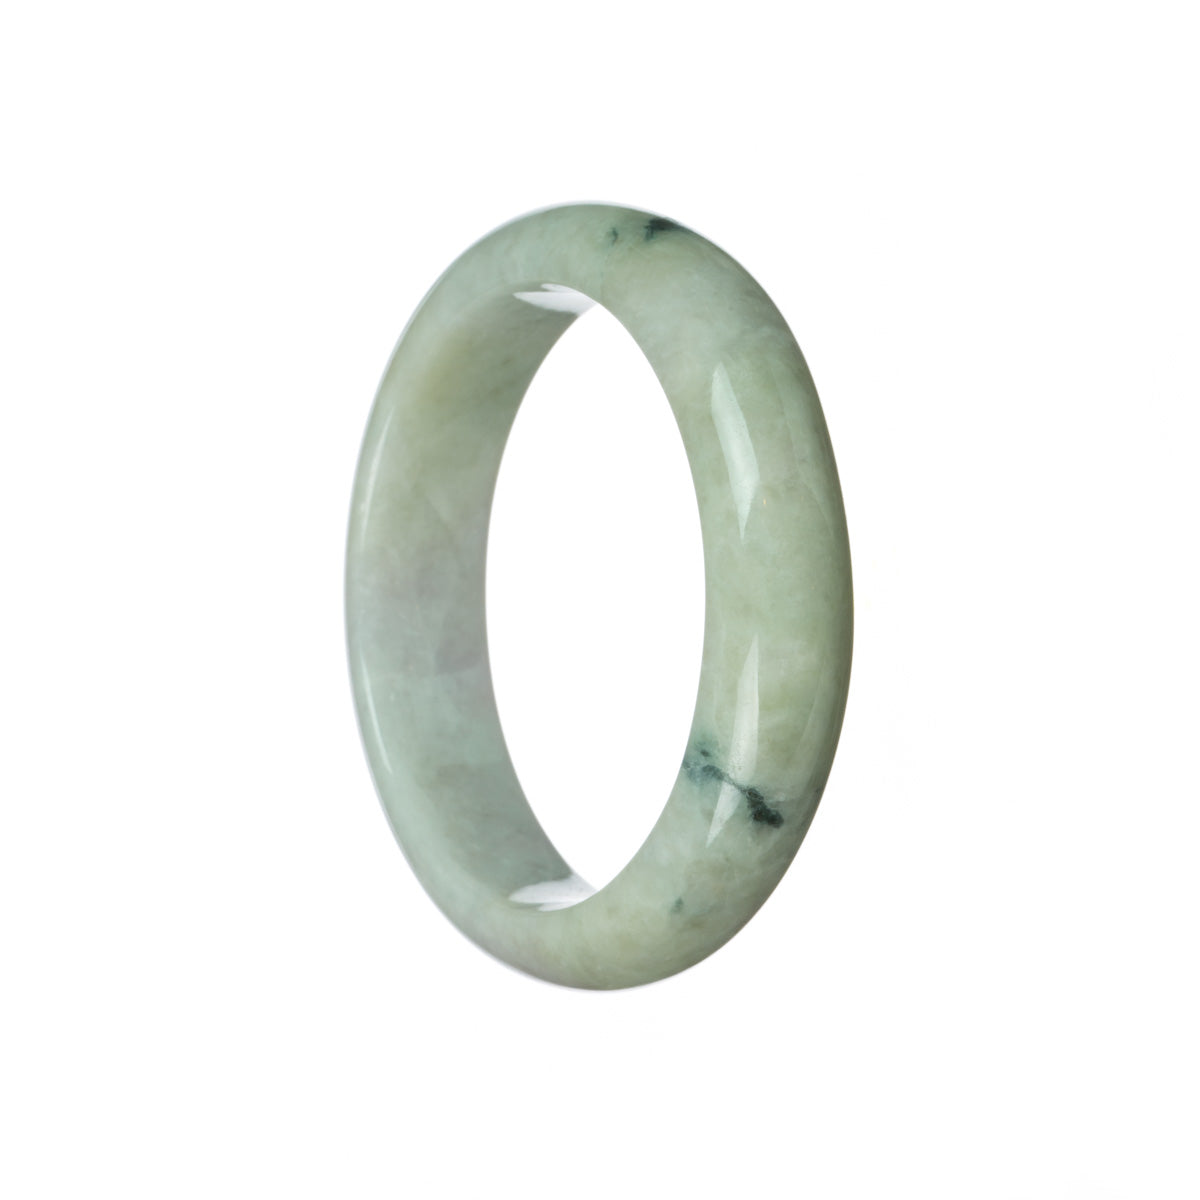 A half moon-shaped jade bangle bracelet with a real natural pale green and pale lavender color.